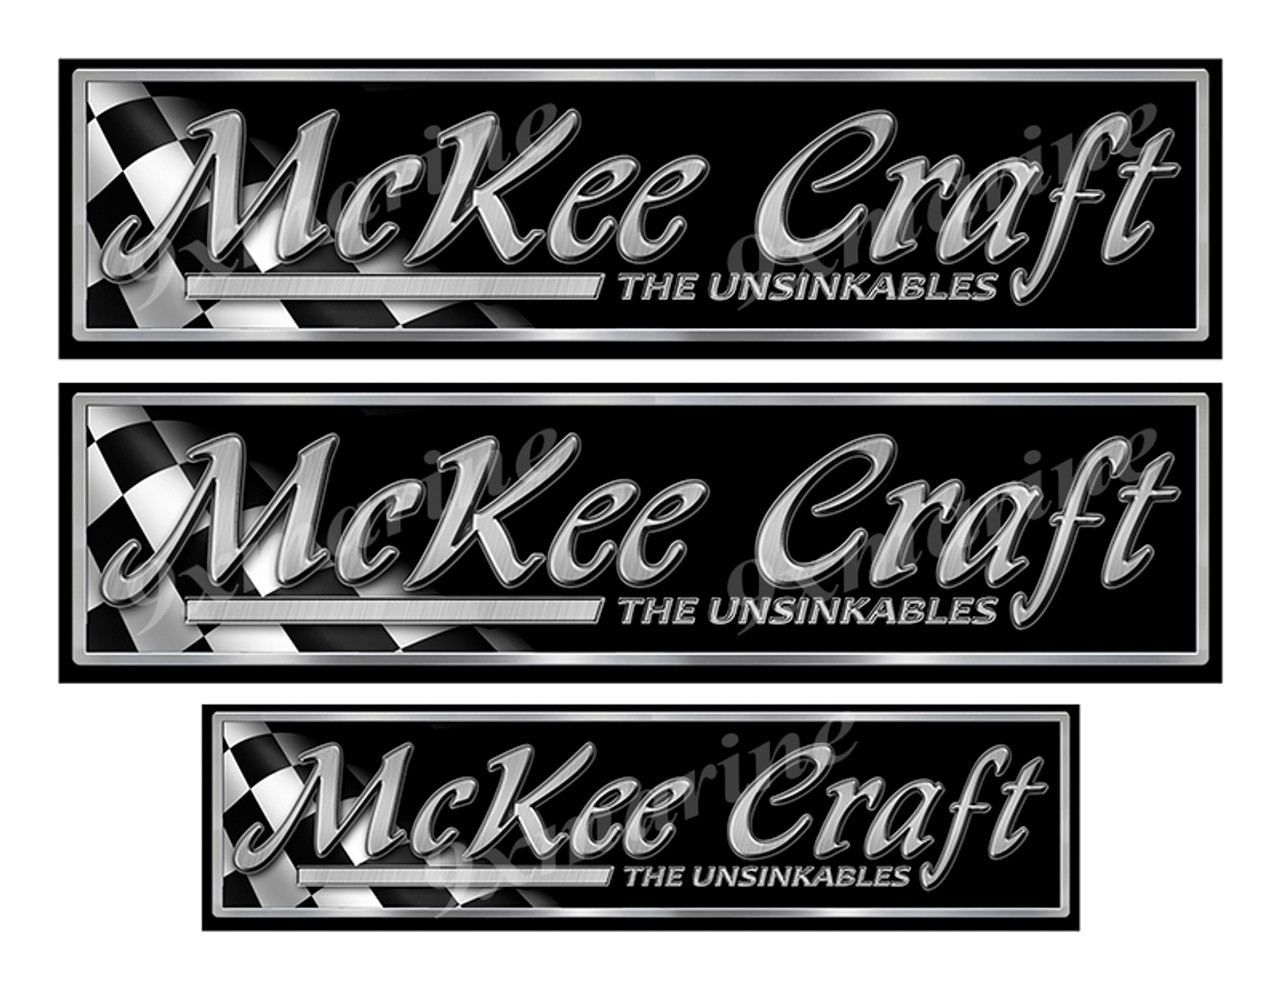 Three McKee Craft Boat Classic Racing 10" long Stickers